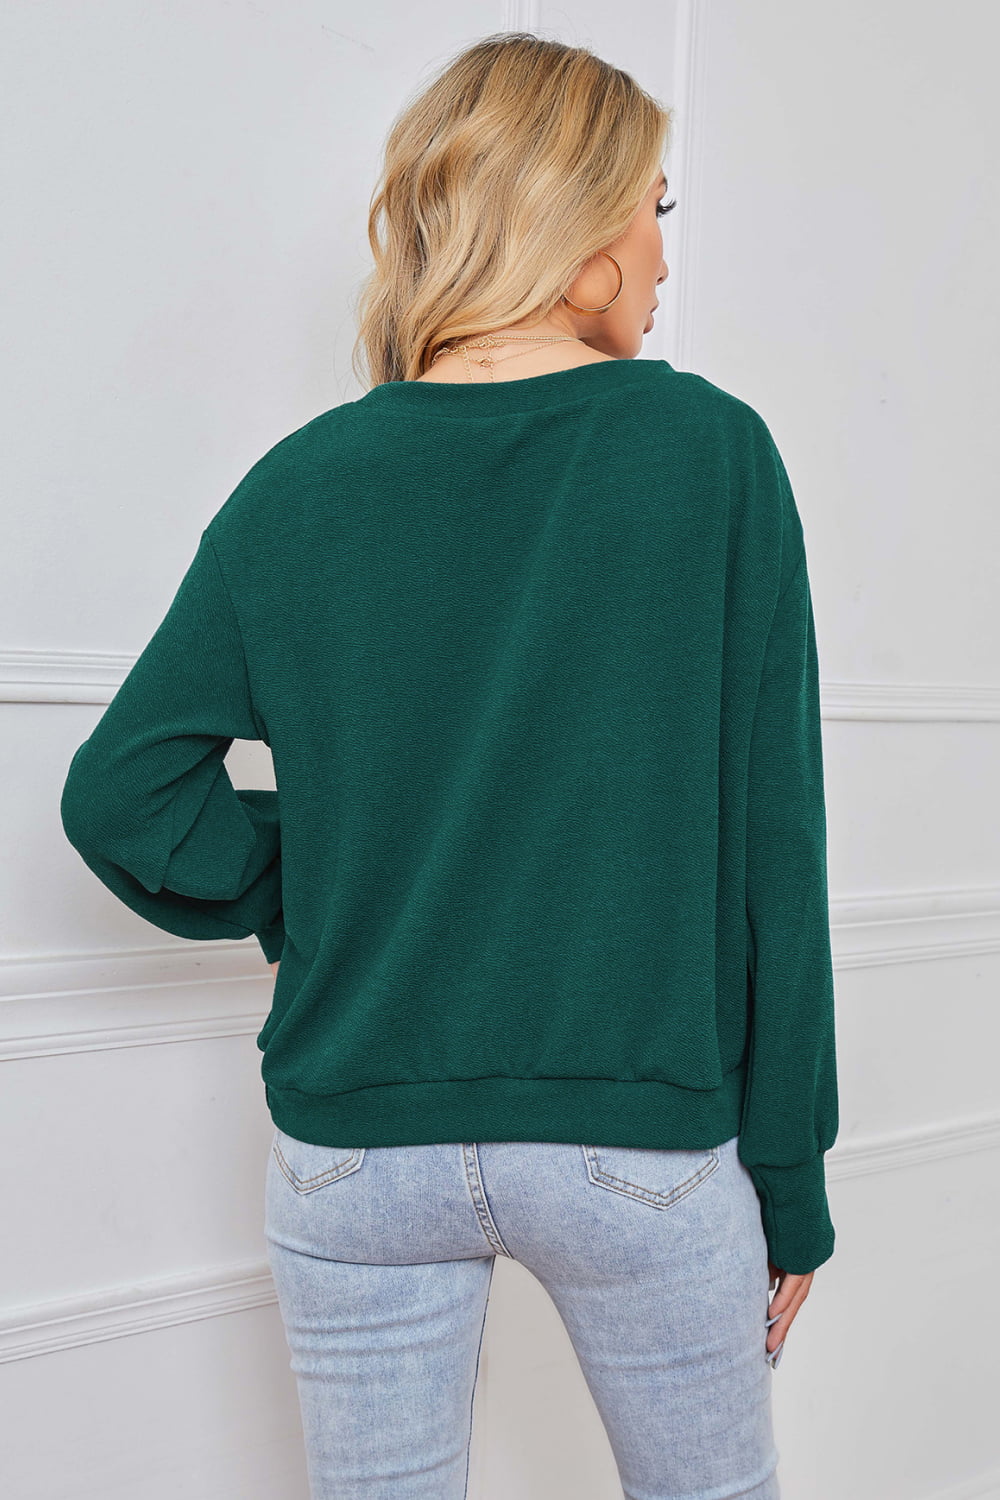 Women’s Round Neck Dropped Shoulder Pullover Sweater